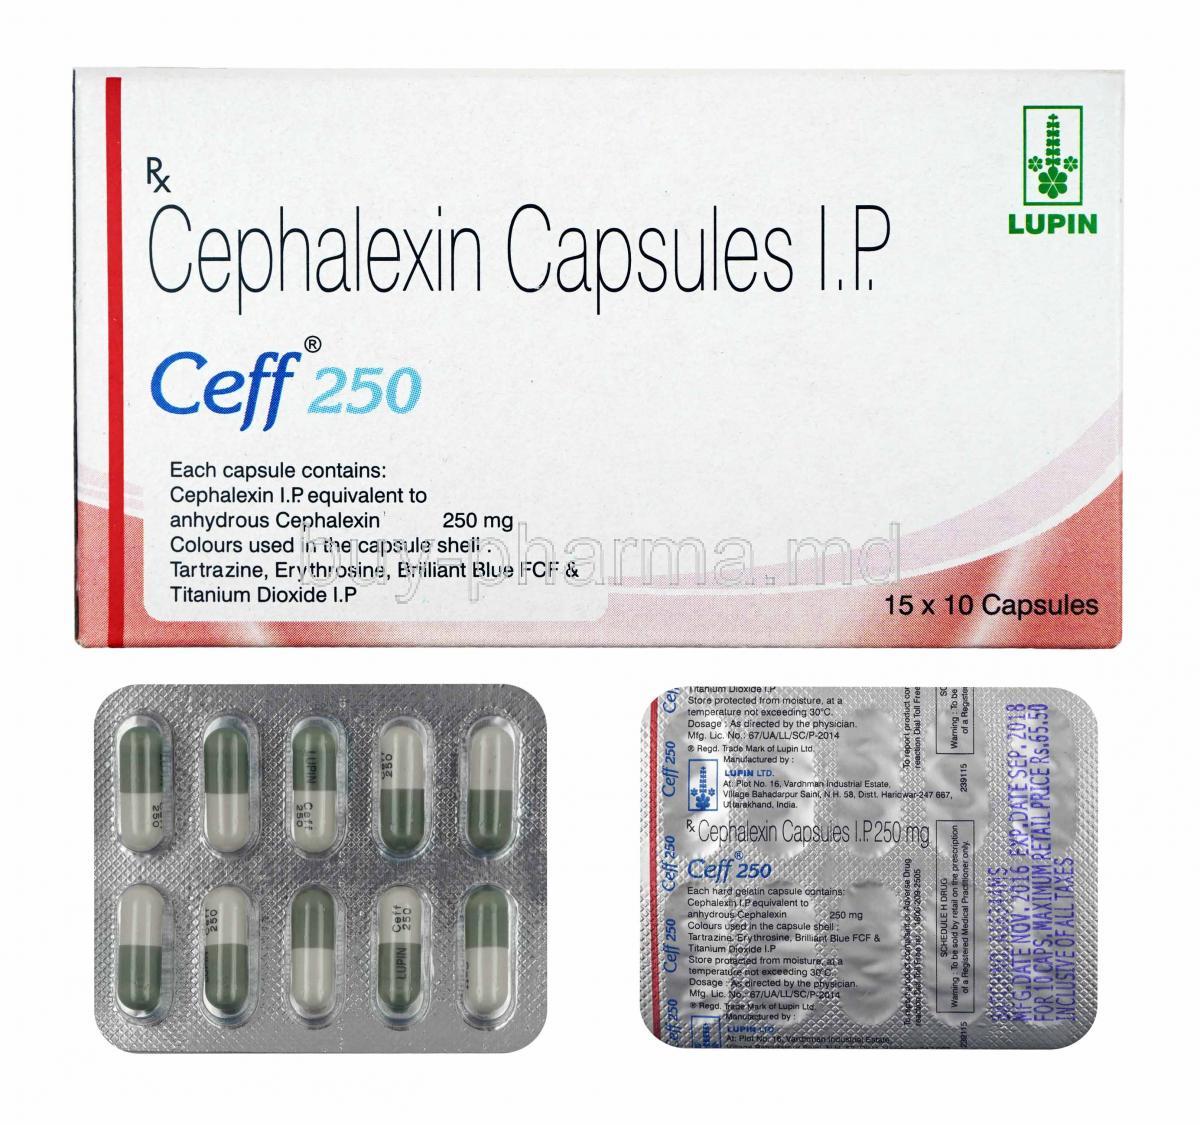 Ceff, Cefalexin 250mg box and capsules